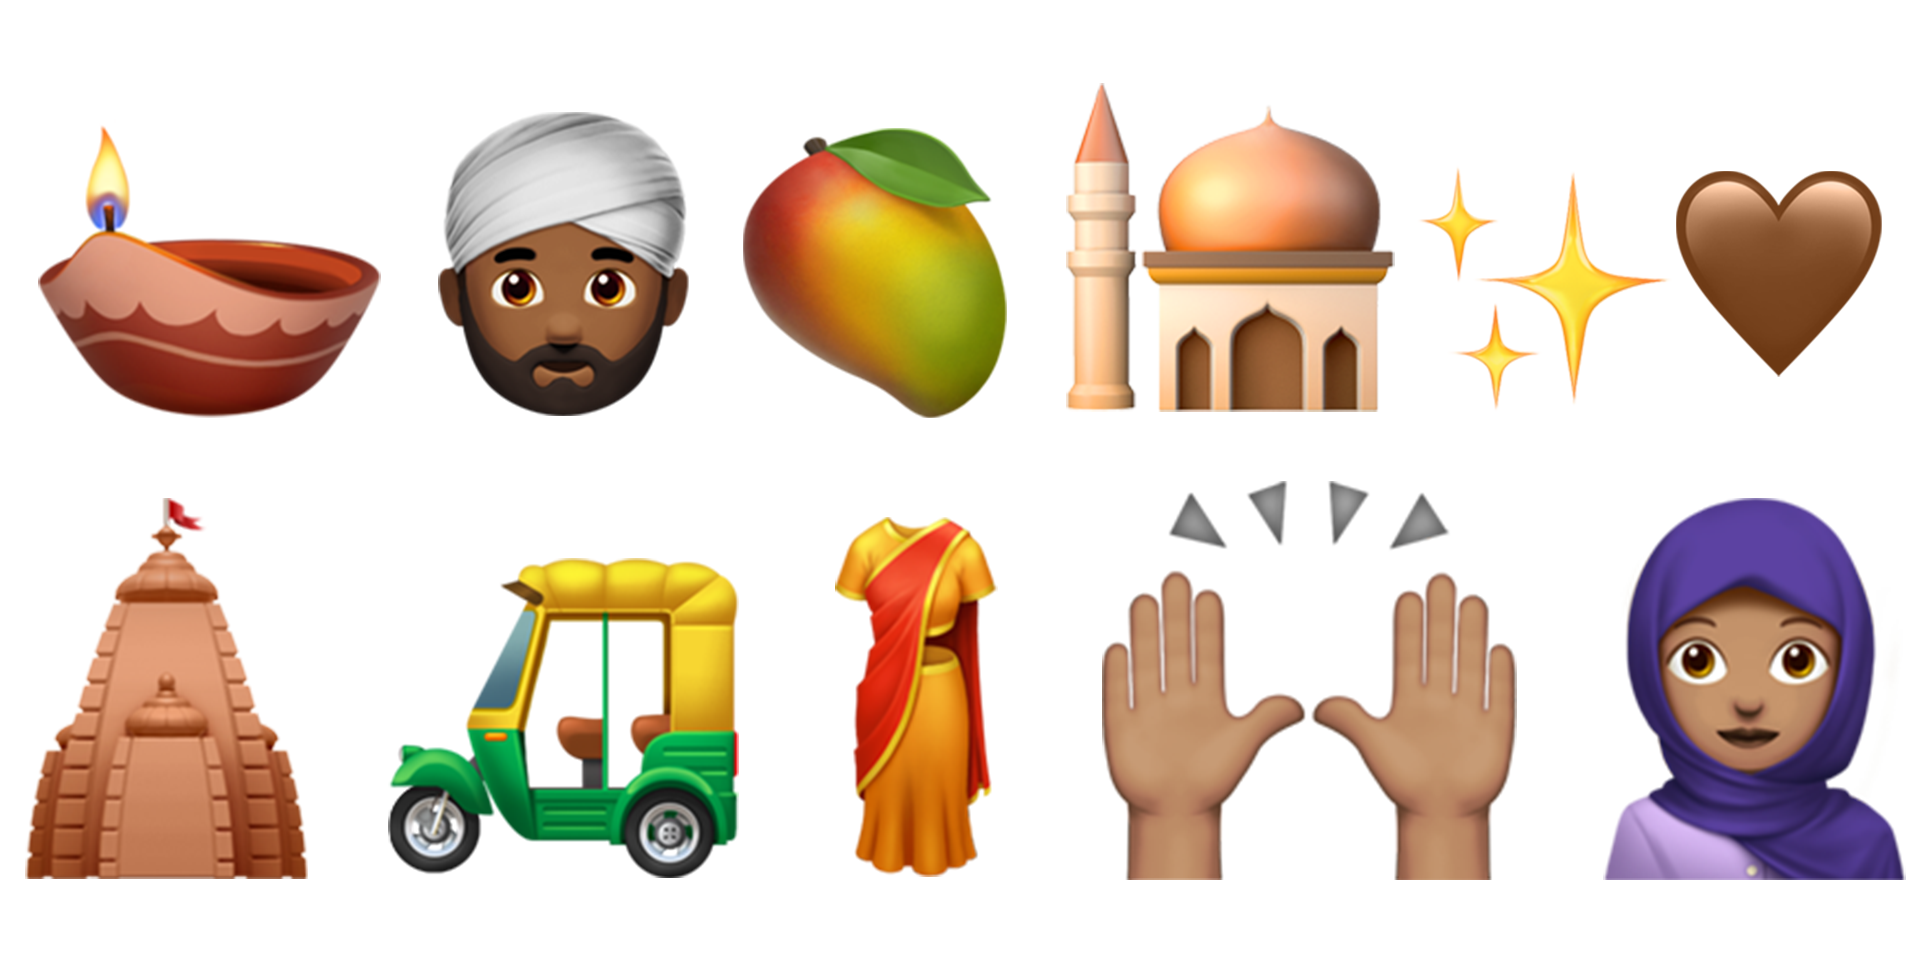 Emojis that have been added in recent years, from the brown heart (2019), sari (2019), and tuk-tuk (2019), to the woman with a headscarf (2017)